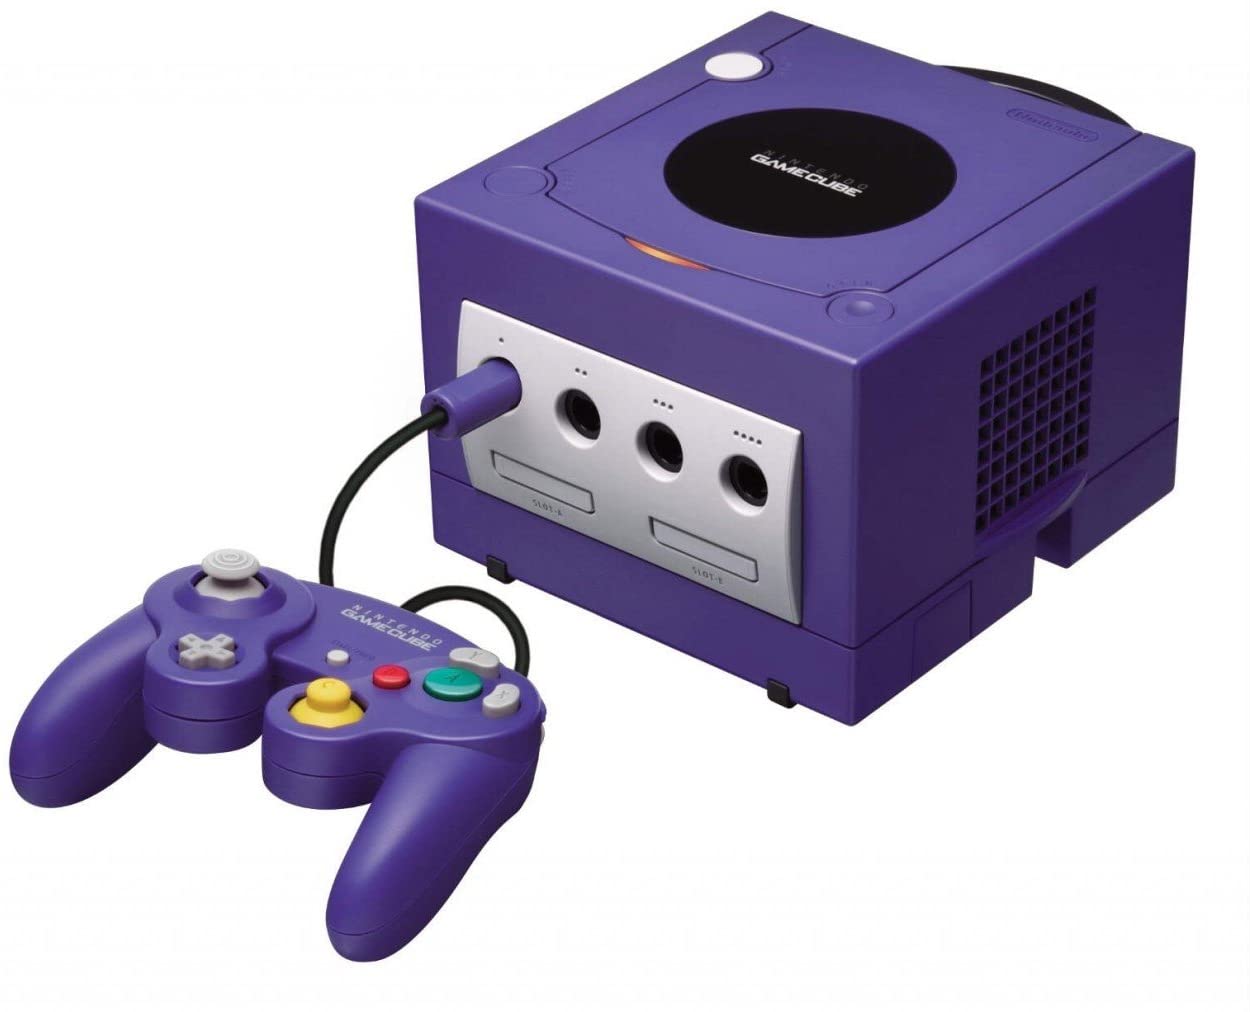 Gamecube Collections